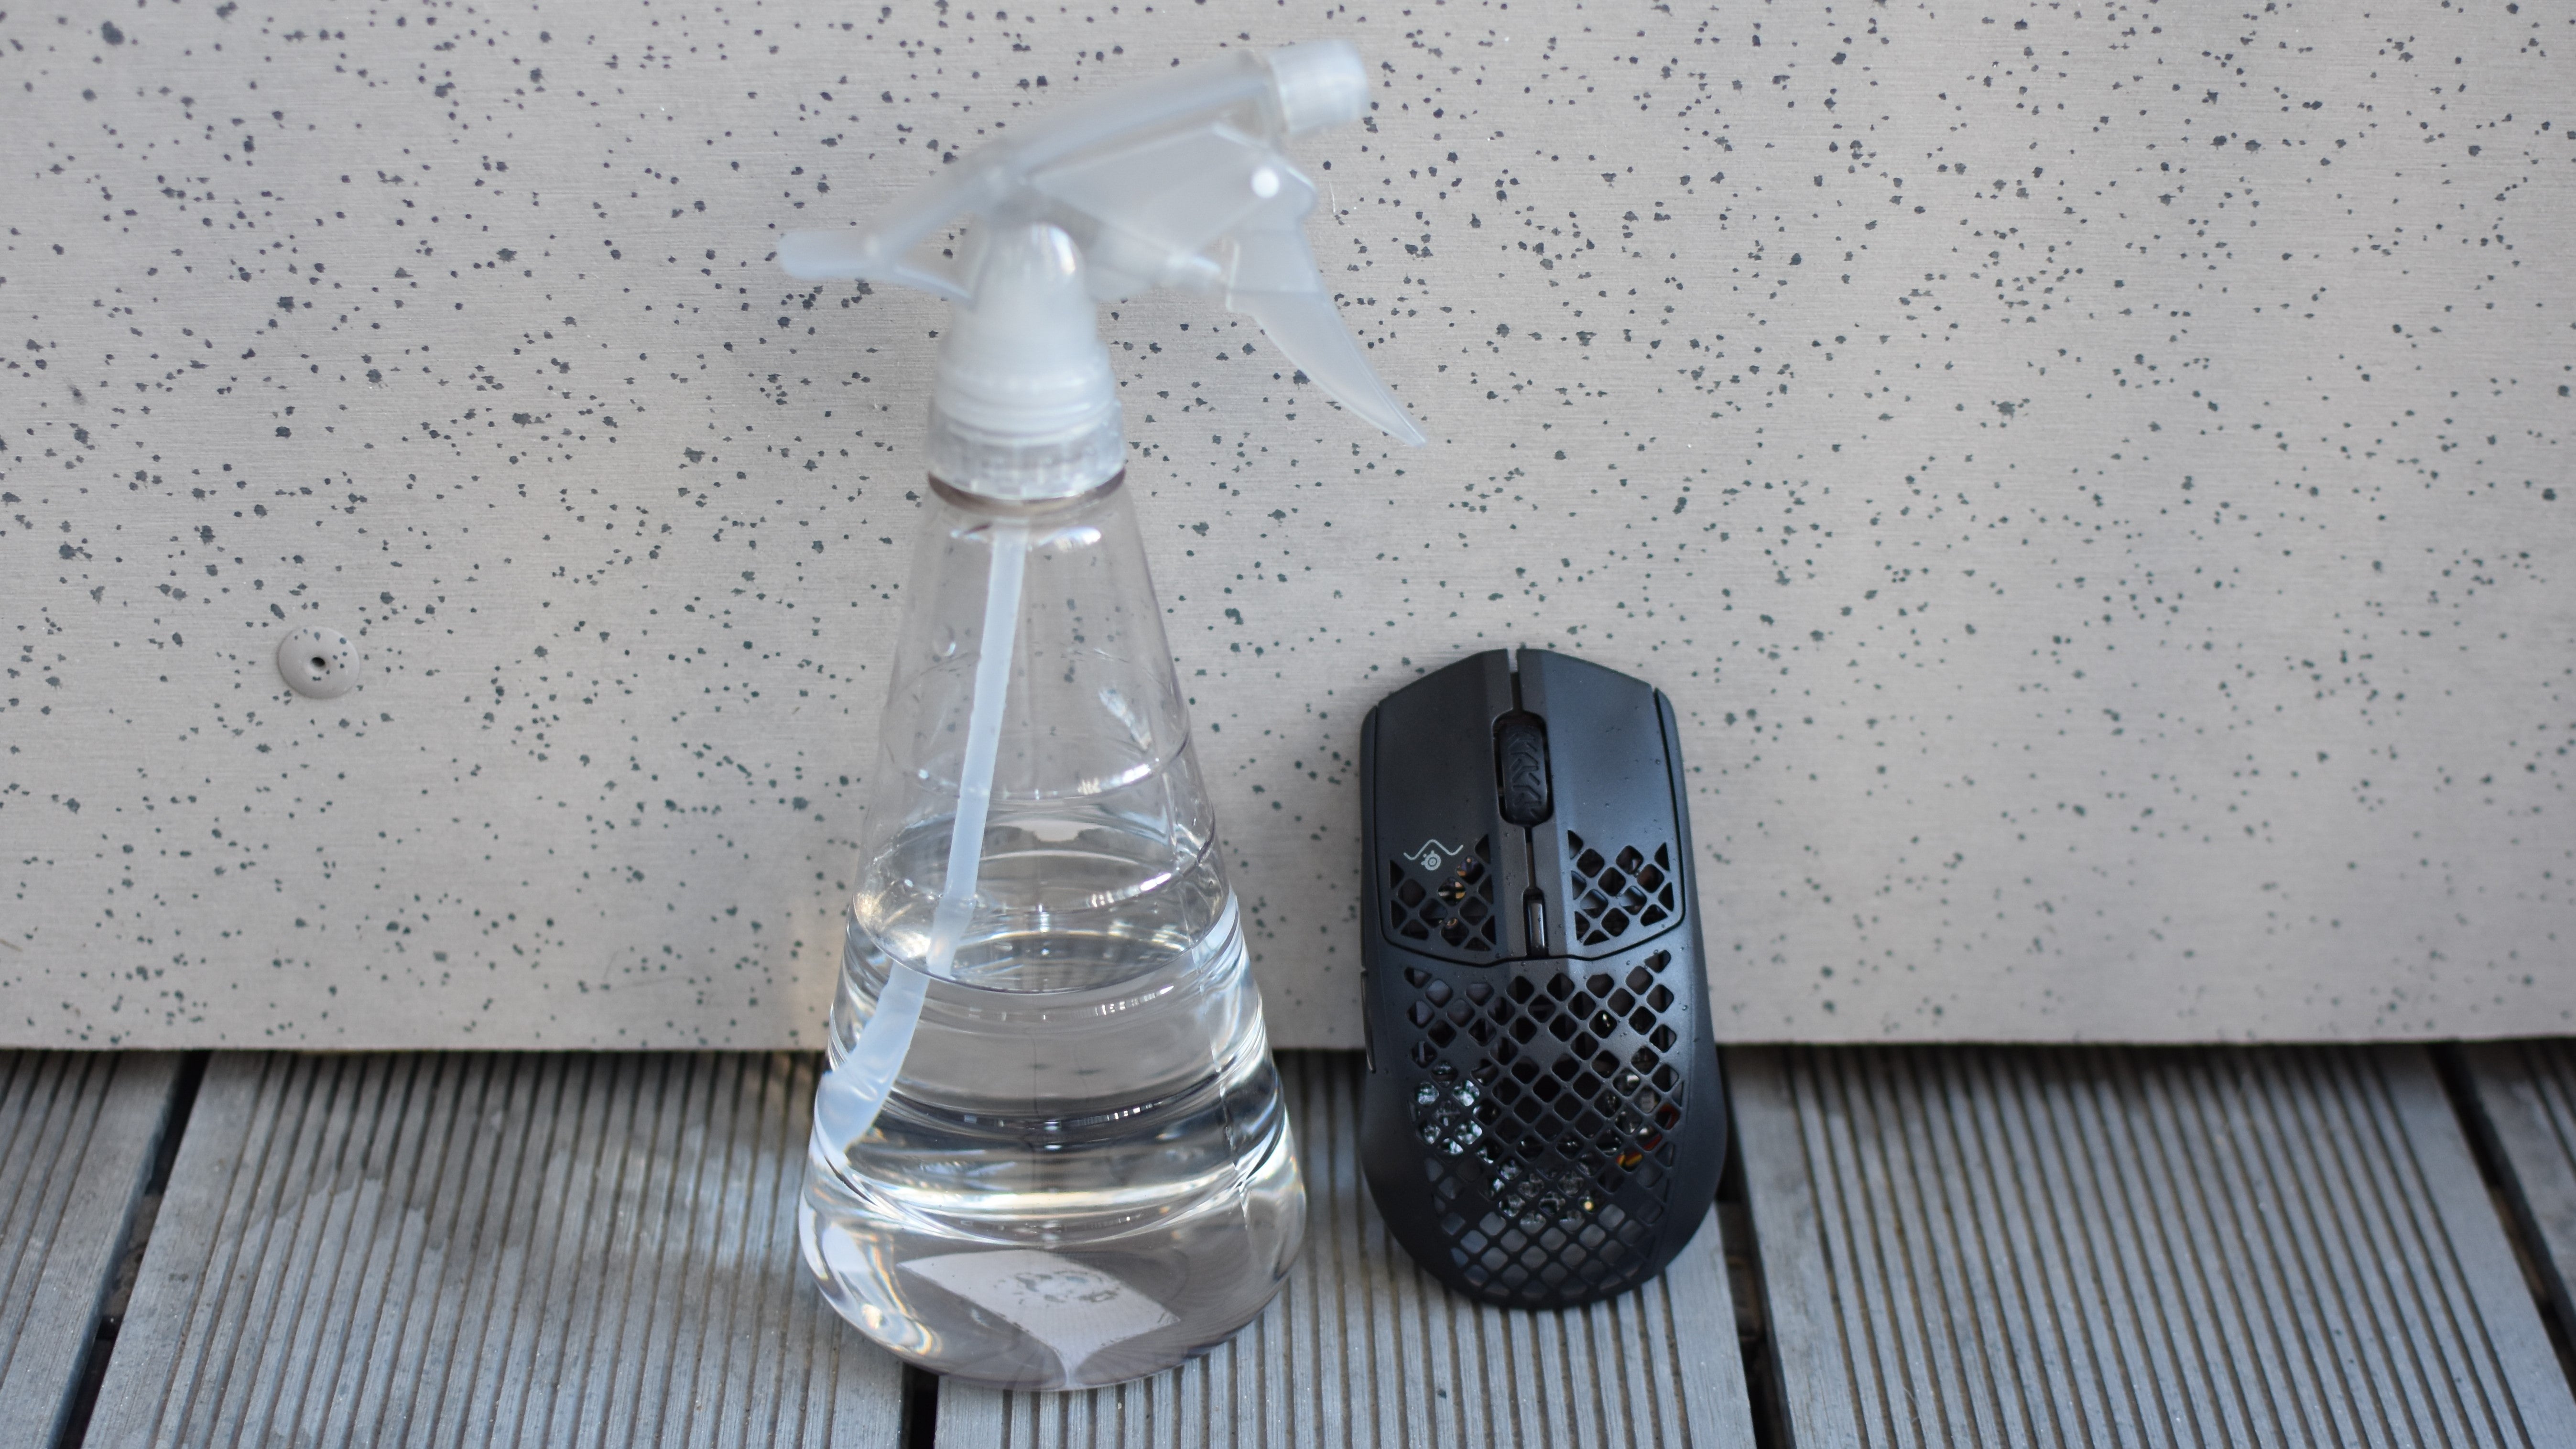 A partially wet SteelSeries Aerox 3 Wireless mouse sitting upright next to a spray bottle of water.